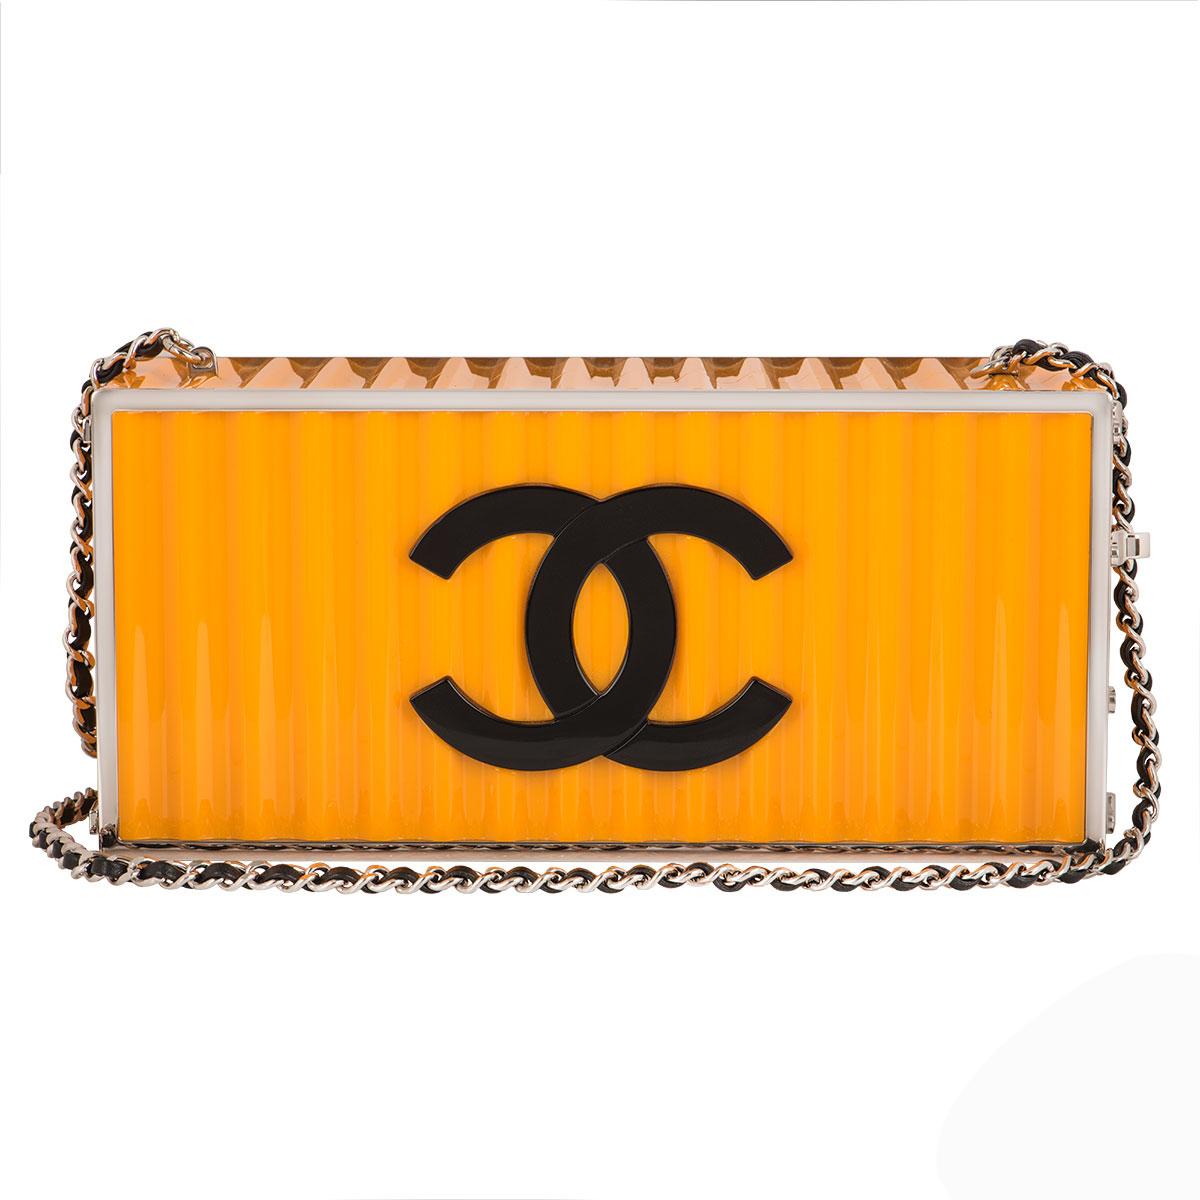 A stunning Chanel clutch bag from the Metiers D'arts Paris-Hamburg collection. Part of the summer 2018 collection the bag is made from resin decorated with silver hardware in a design of a yellow shipping container with the Chanel logo on one side,